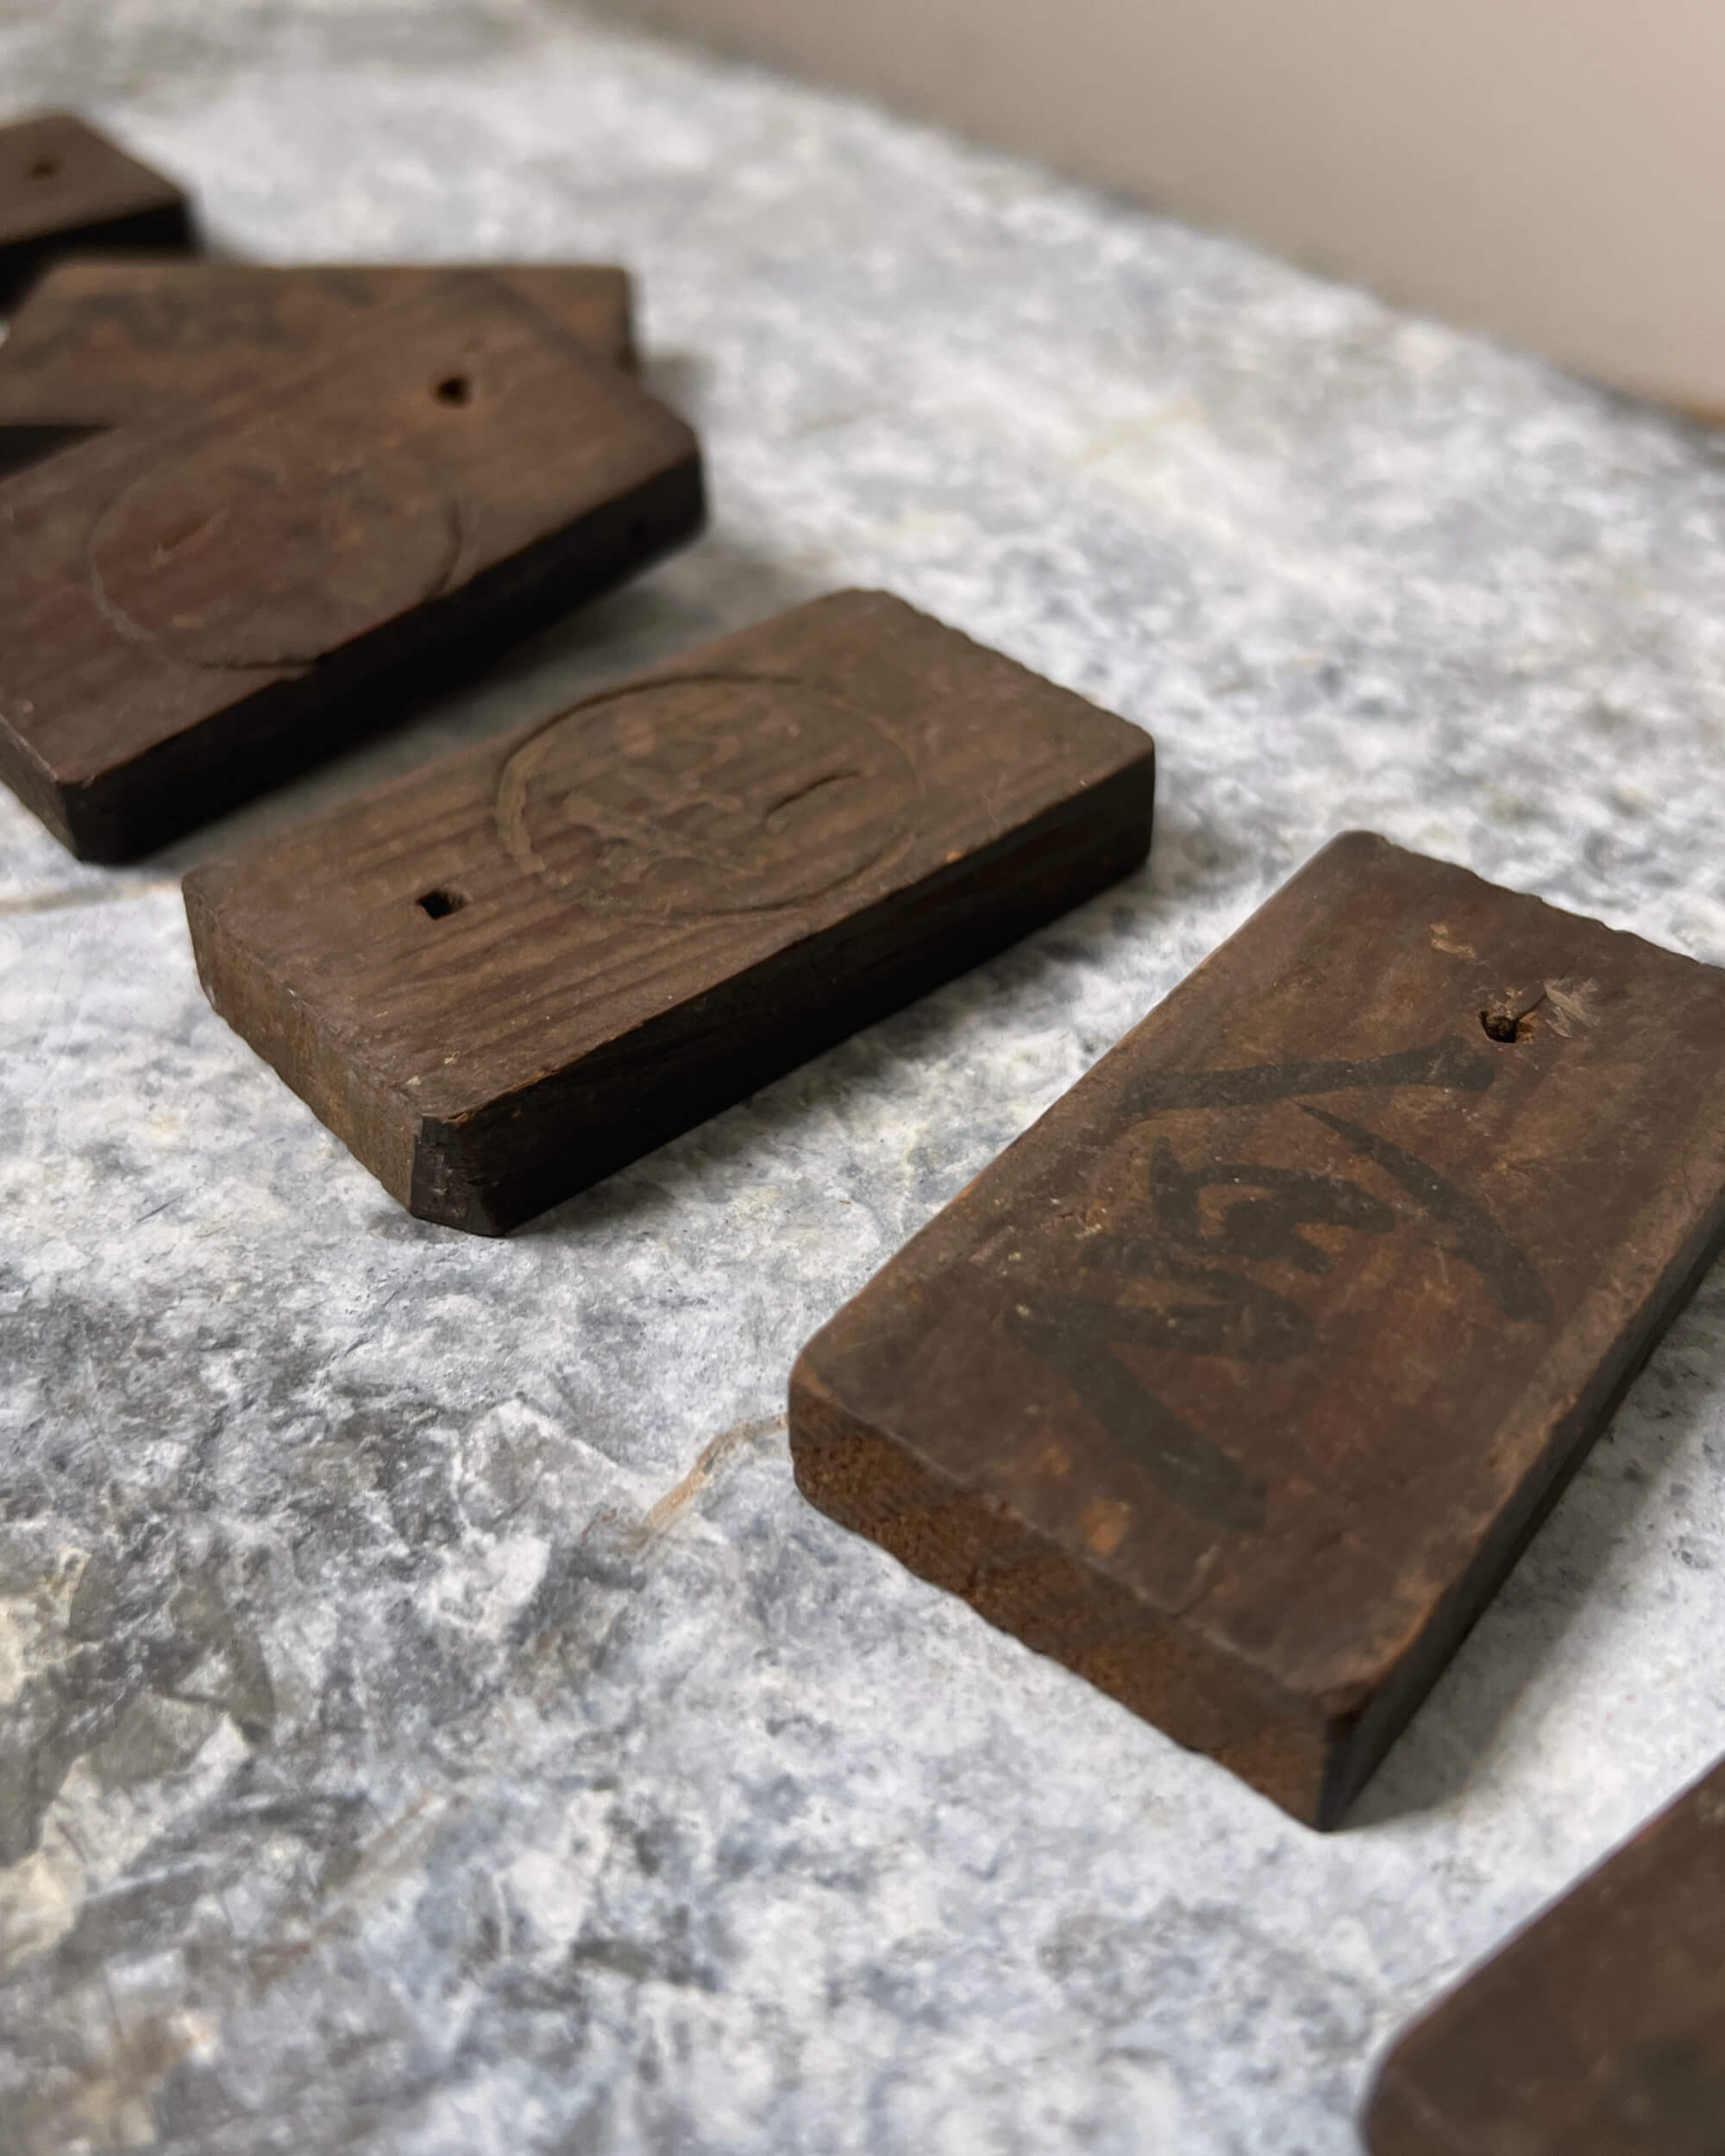 vintage japanese wooden tags